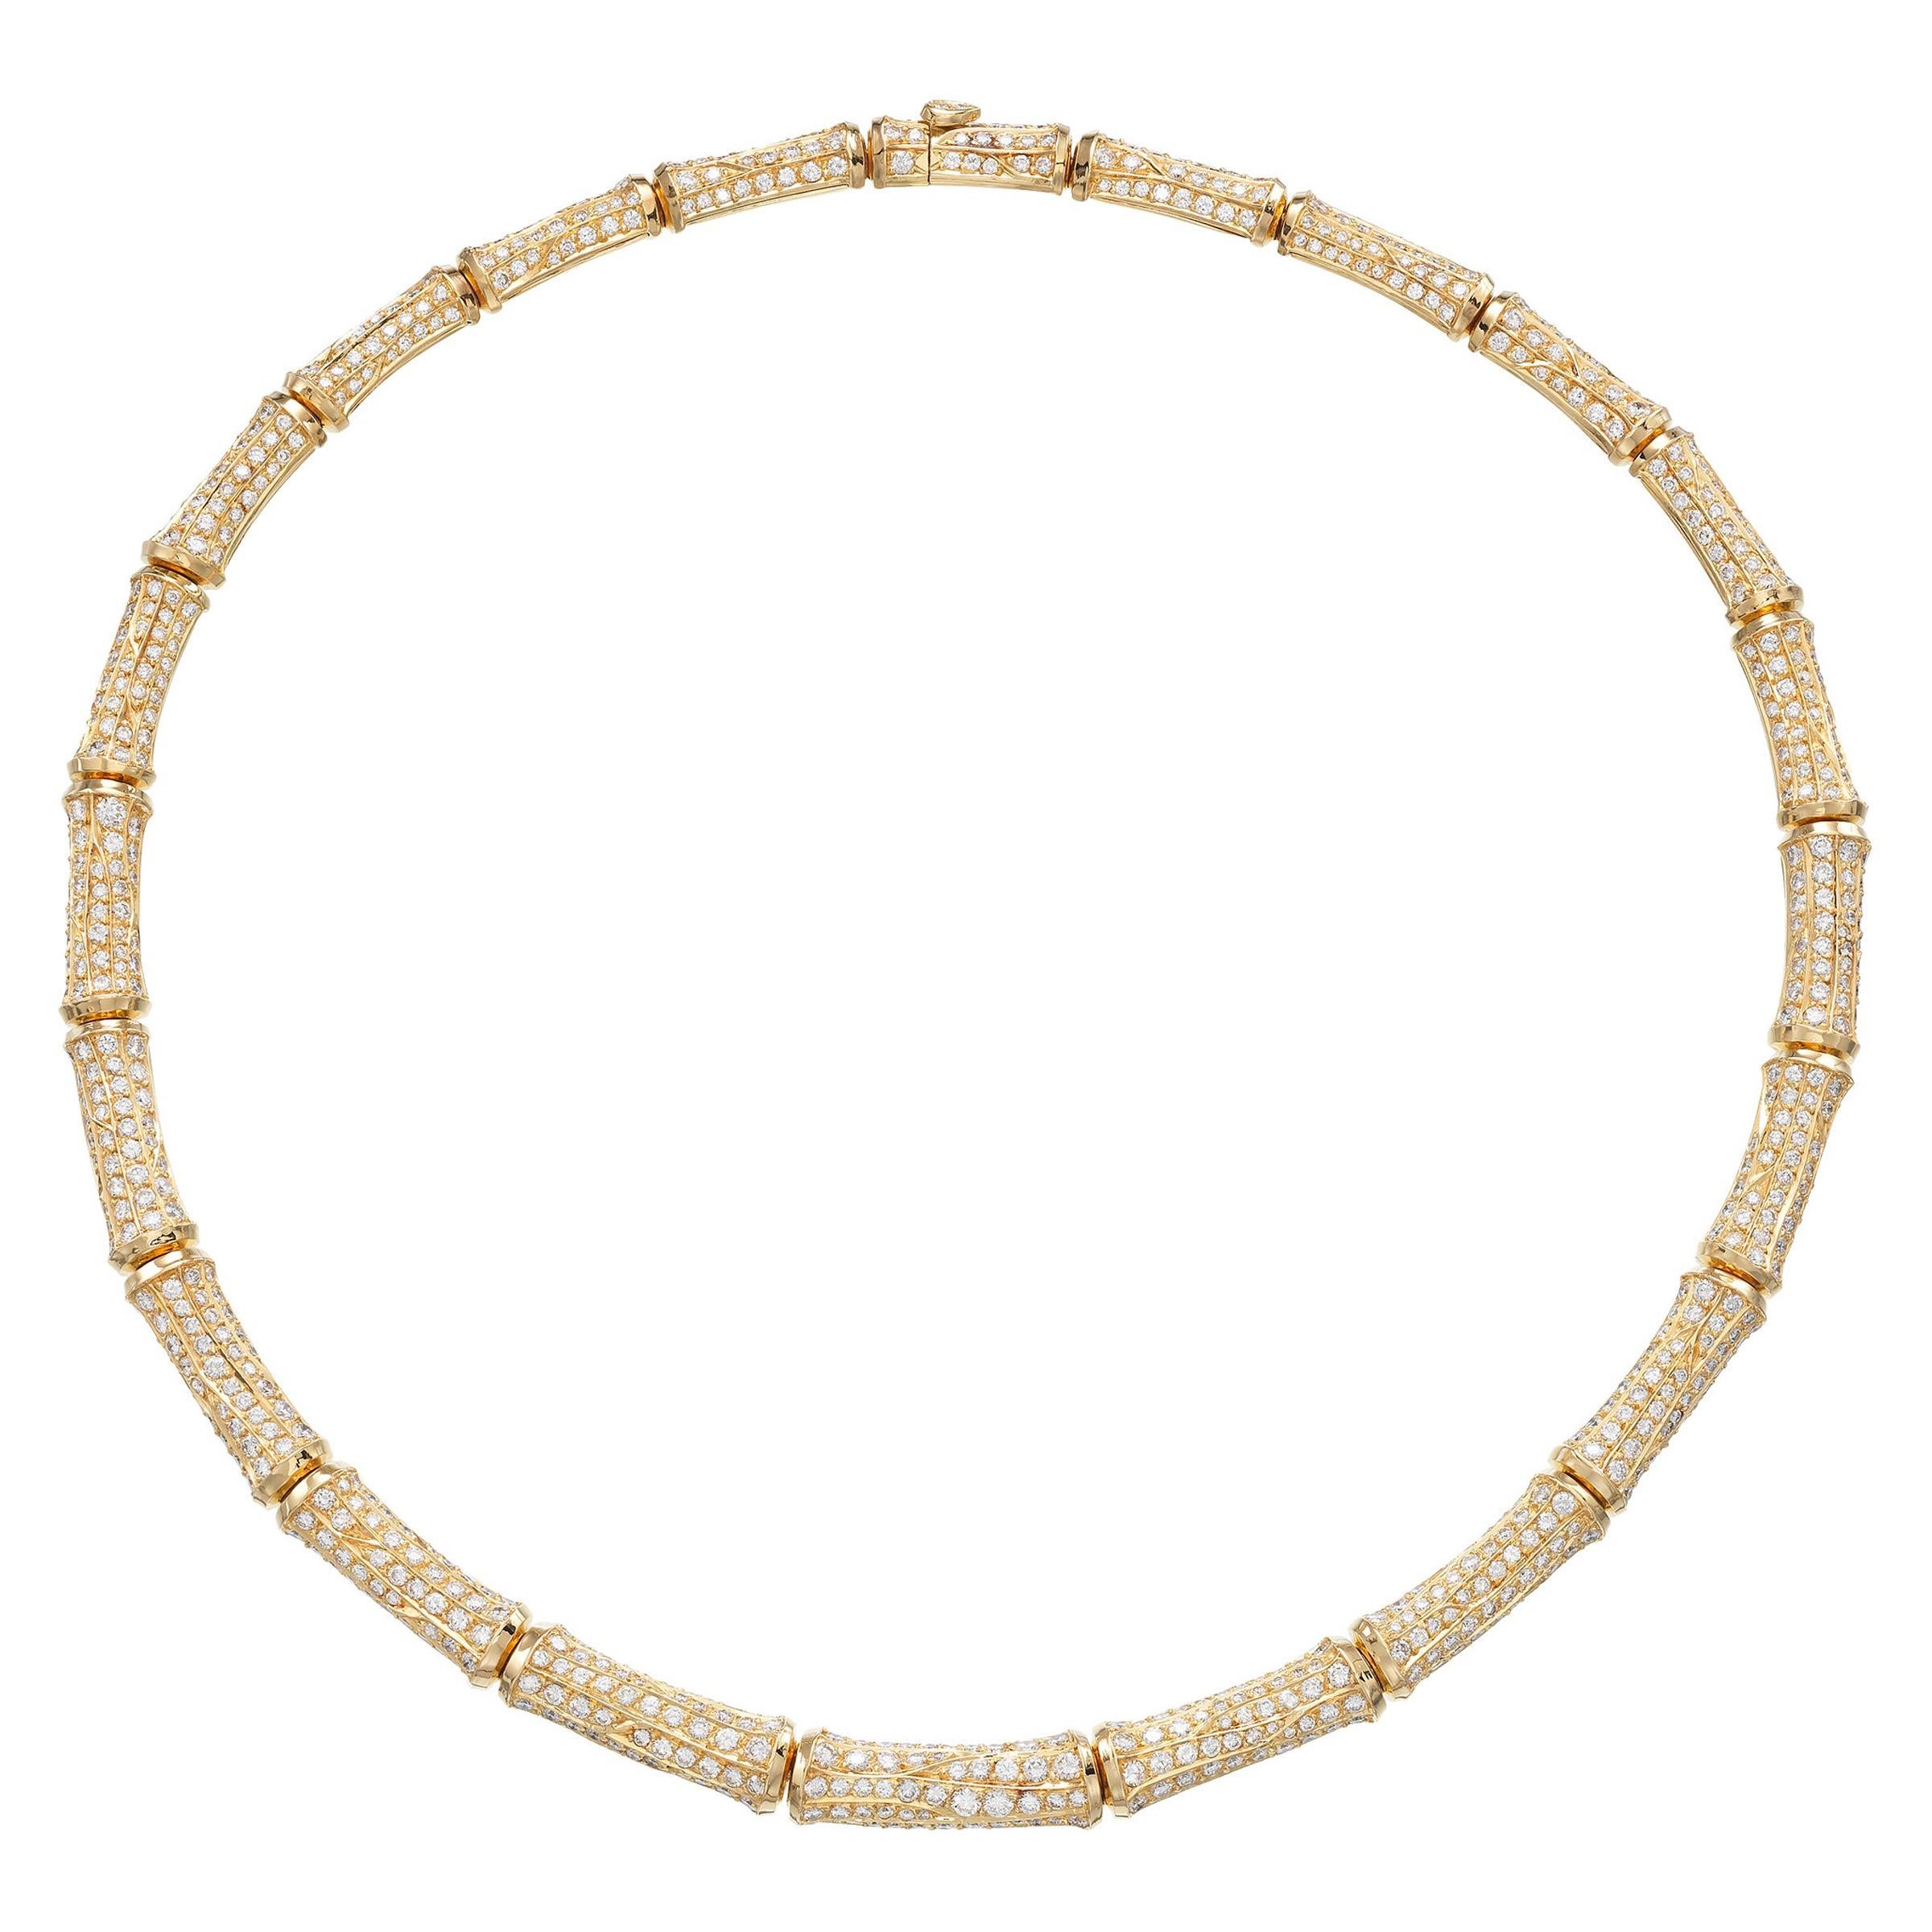 Cartier Bamboo 20cts Diamond Necklace in 18 Karat Gold